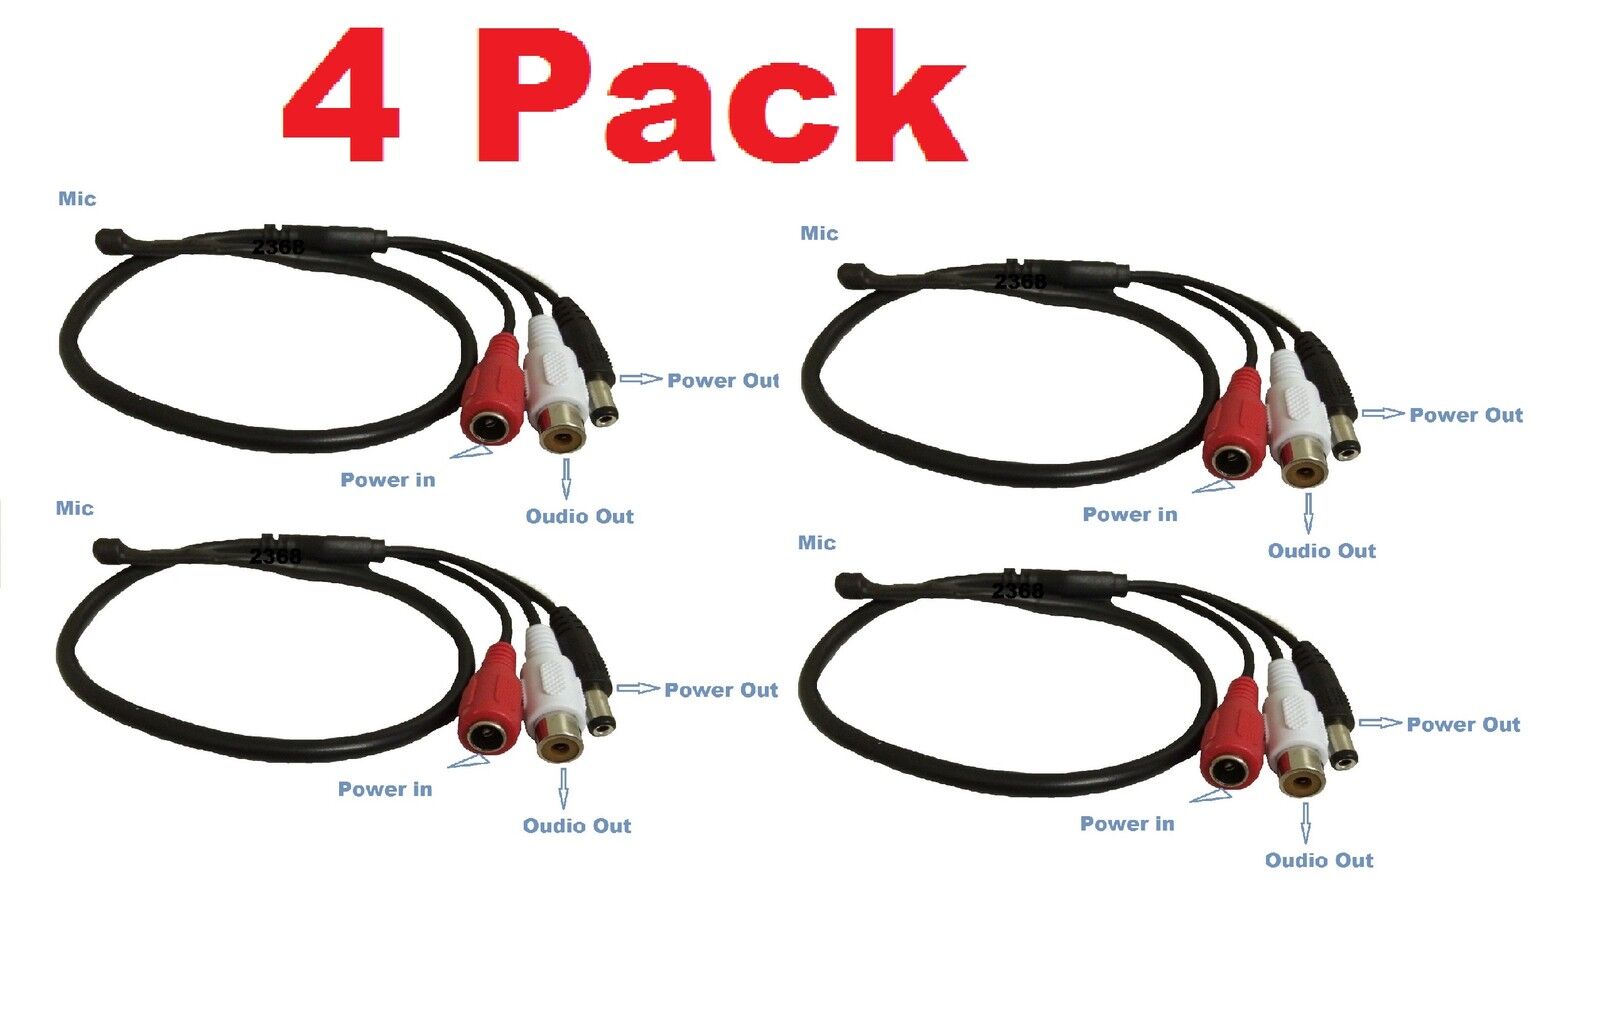 4 Pack High Sensitive Audio Mic Microphone for CCTV Security Camera 